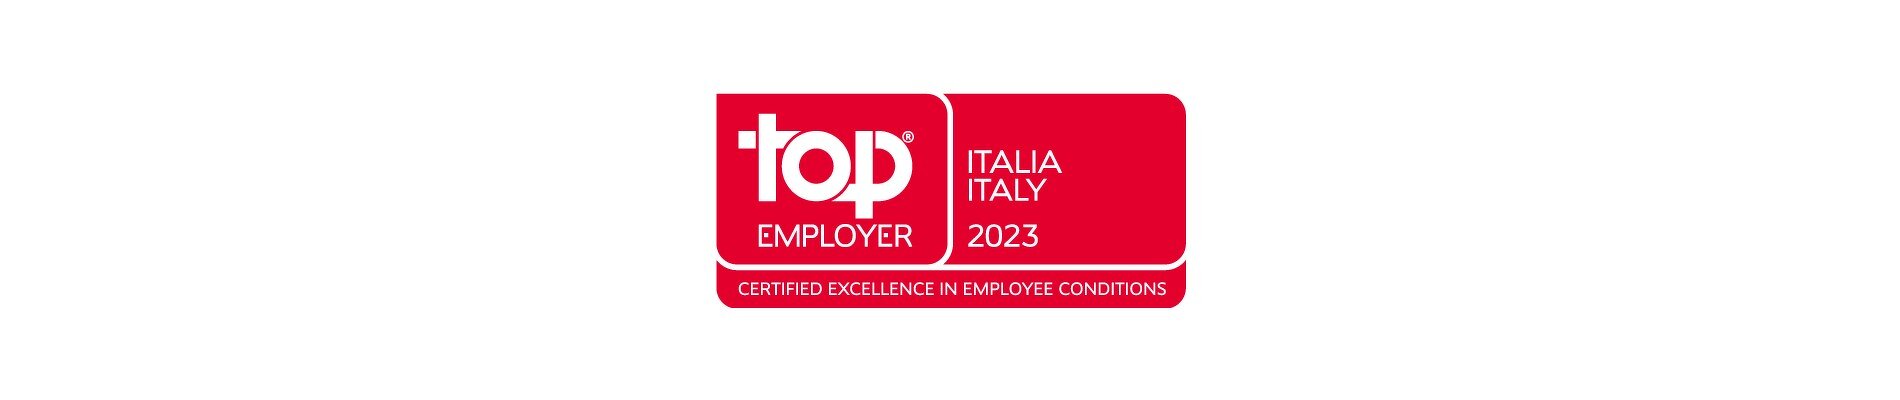 The European House – Ambrosetti is recognised  as a Top Employer 2023 in Italy